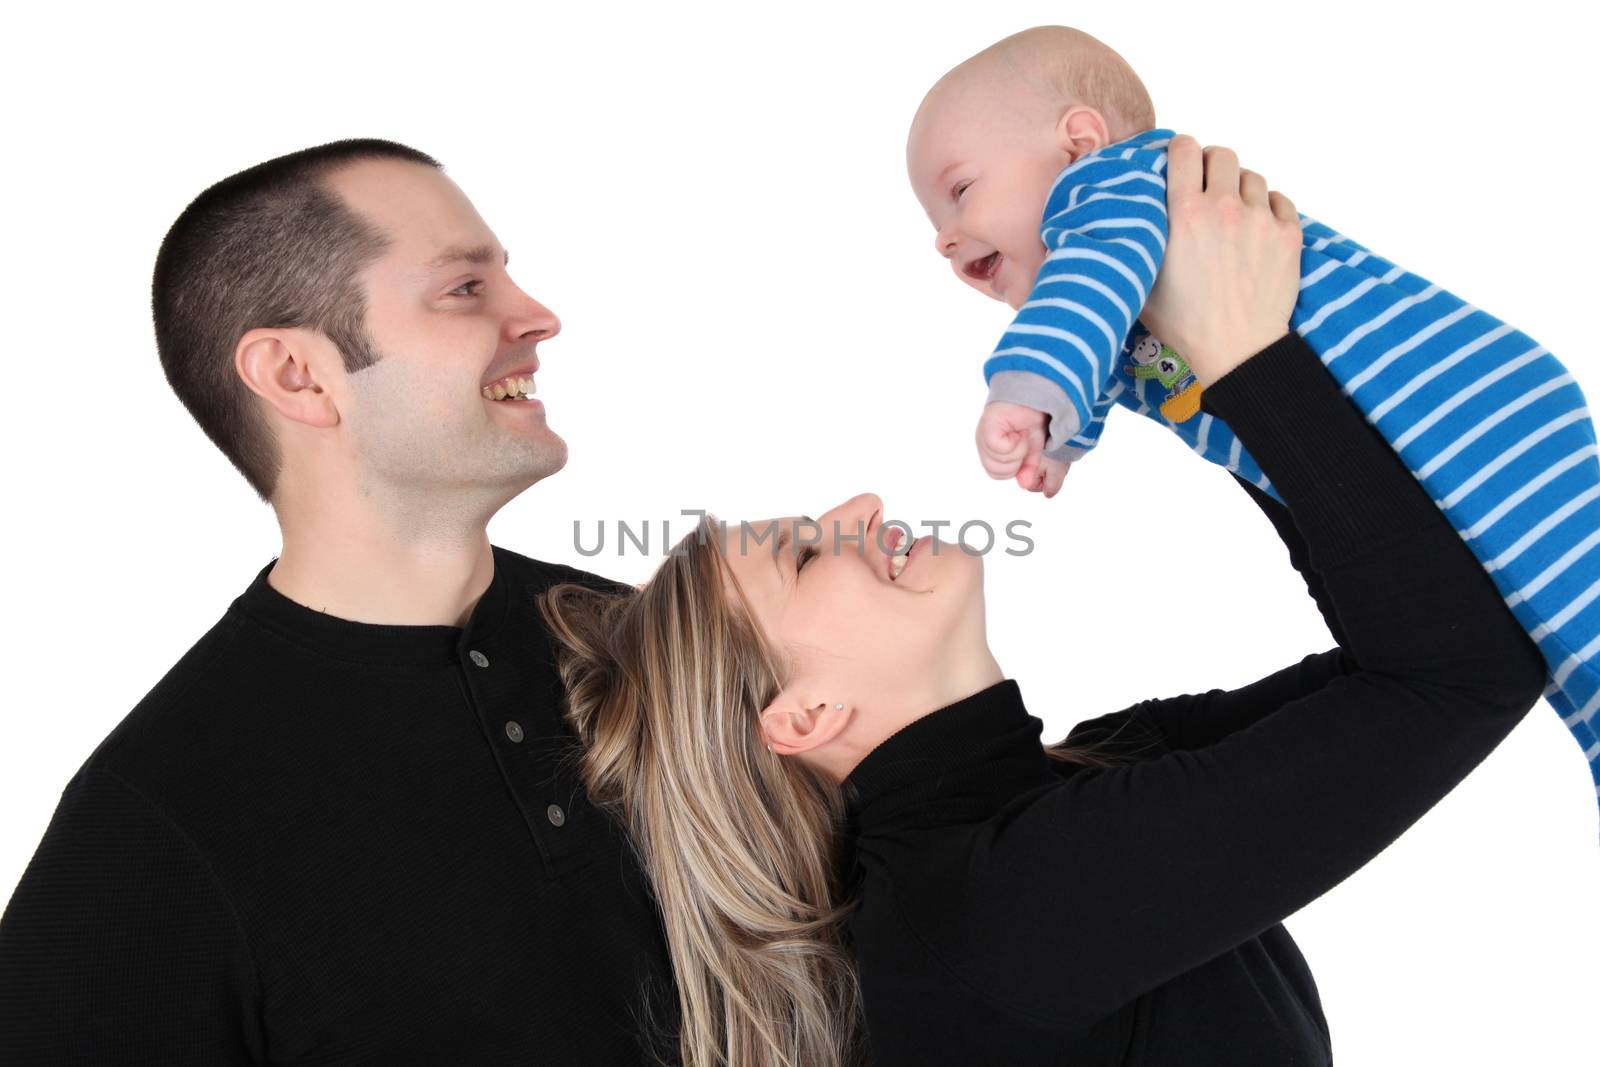 Baby boy and his parents against white background